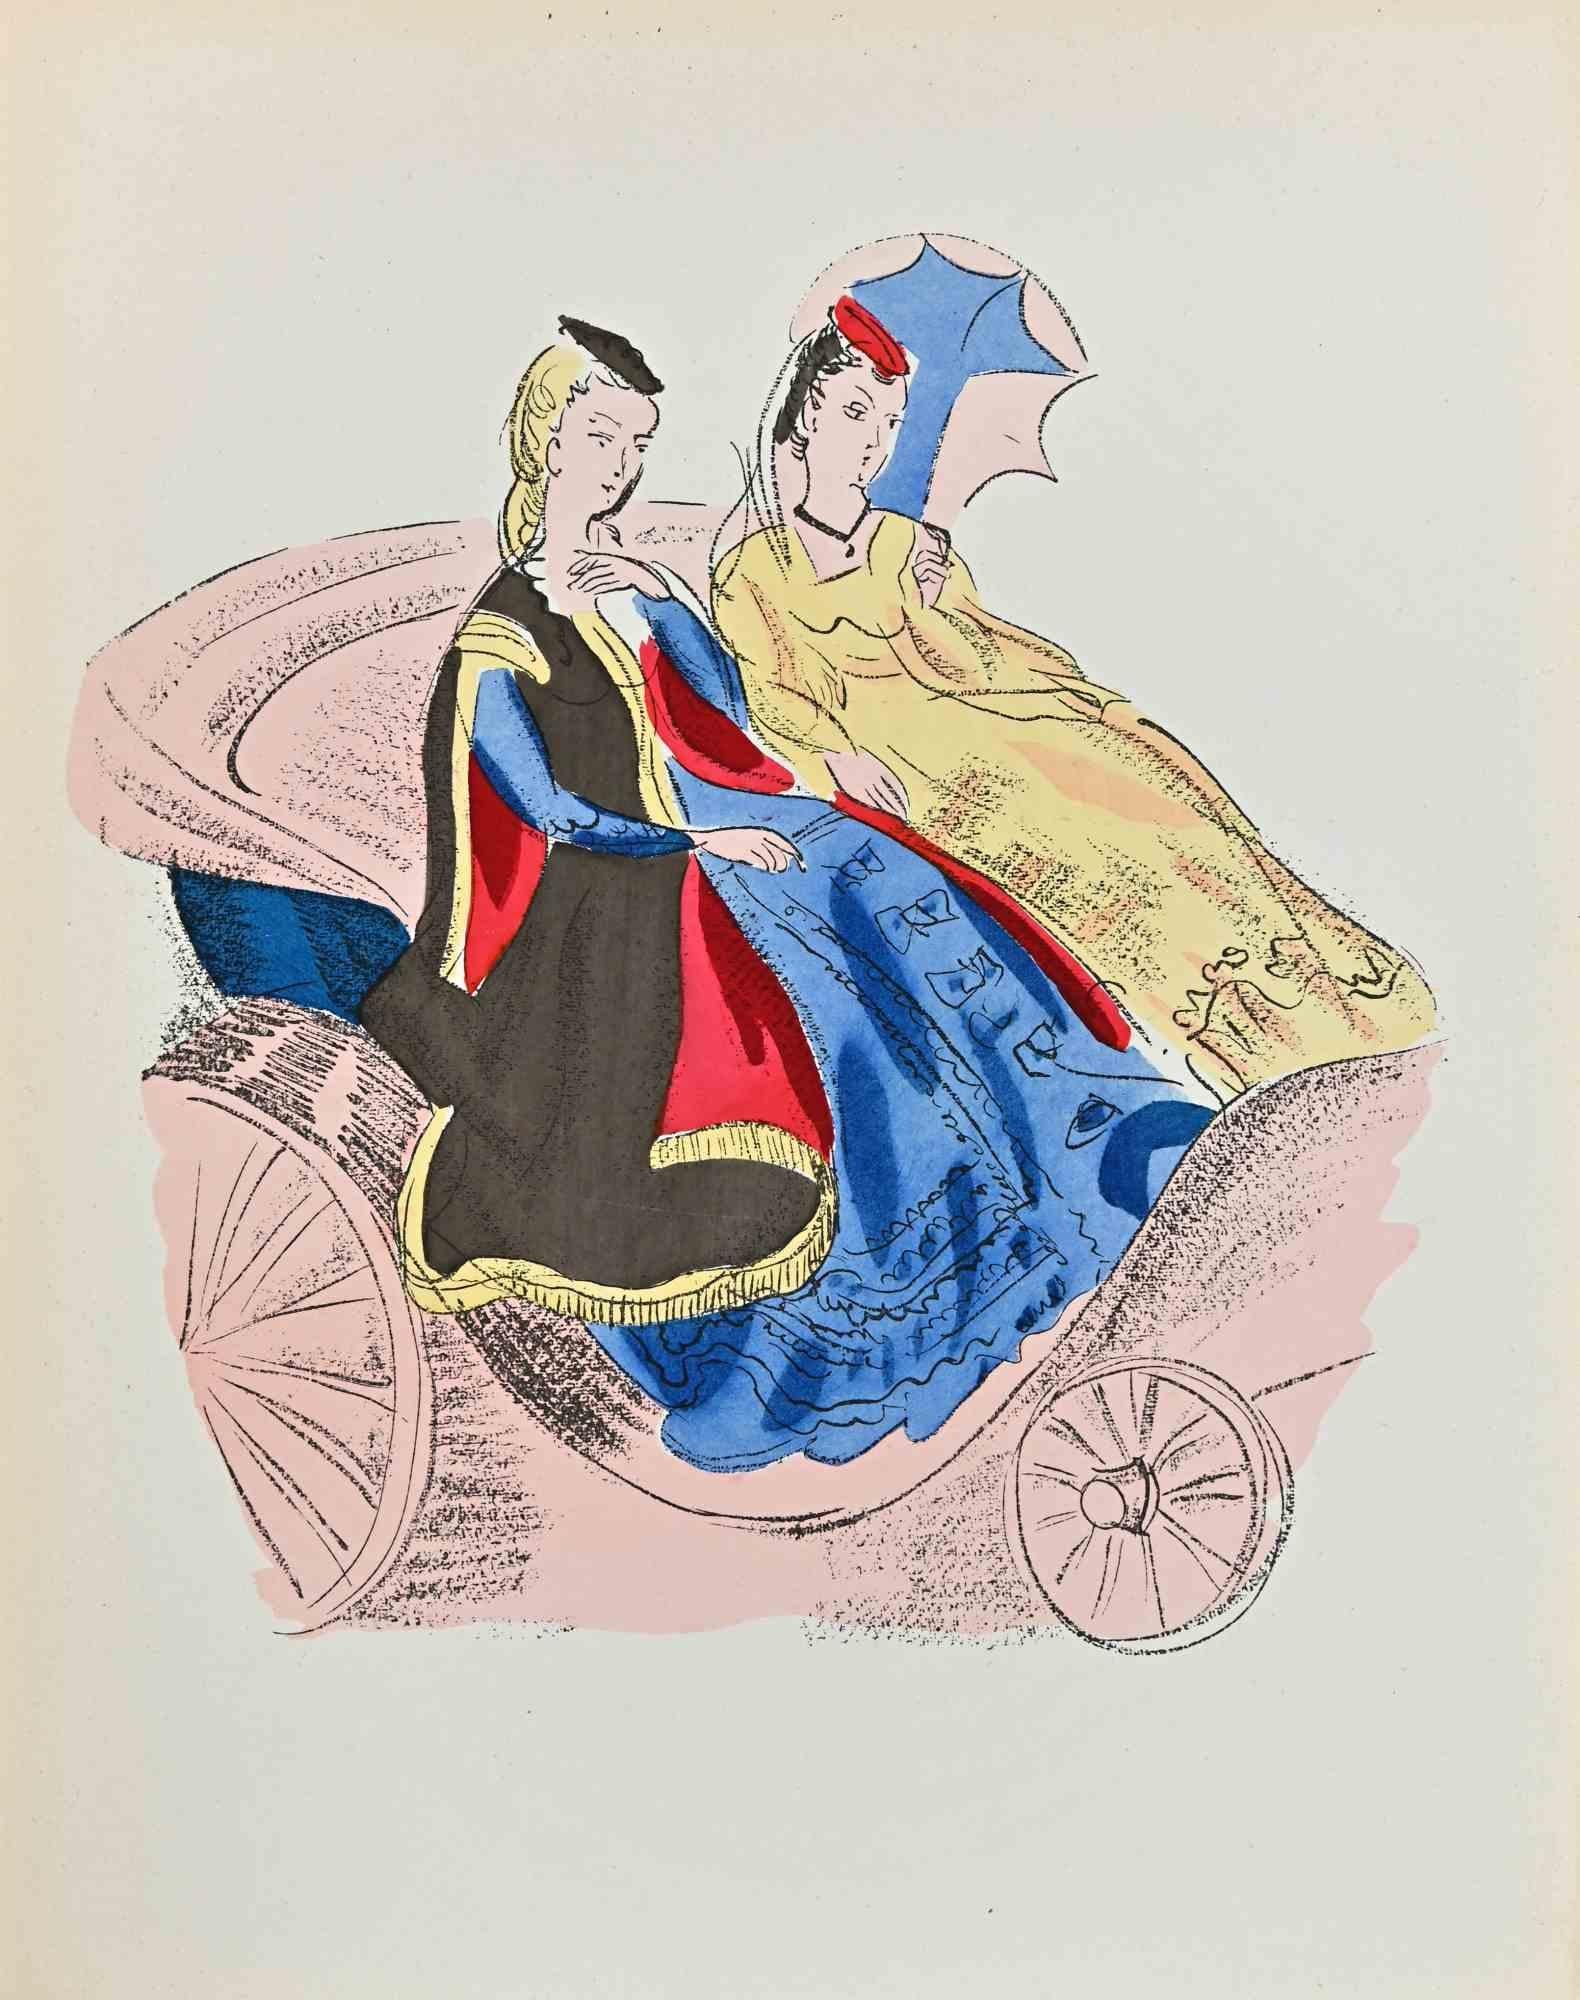 Carriage Rideis a vintage lithograph realized after Raoul Dufy in 1920.

Good conditions.

Edition of 110. Not signed and not numbered, as issued.

The artwork is depicted through confident strokes in a well-balanced composition.